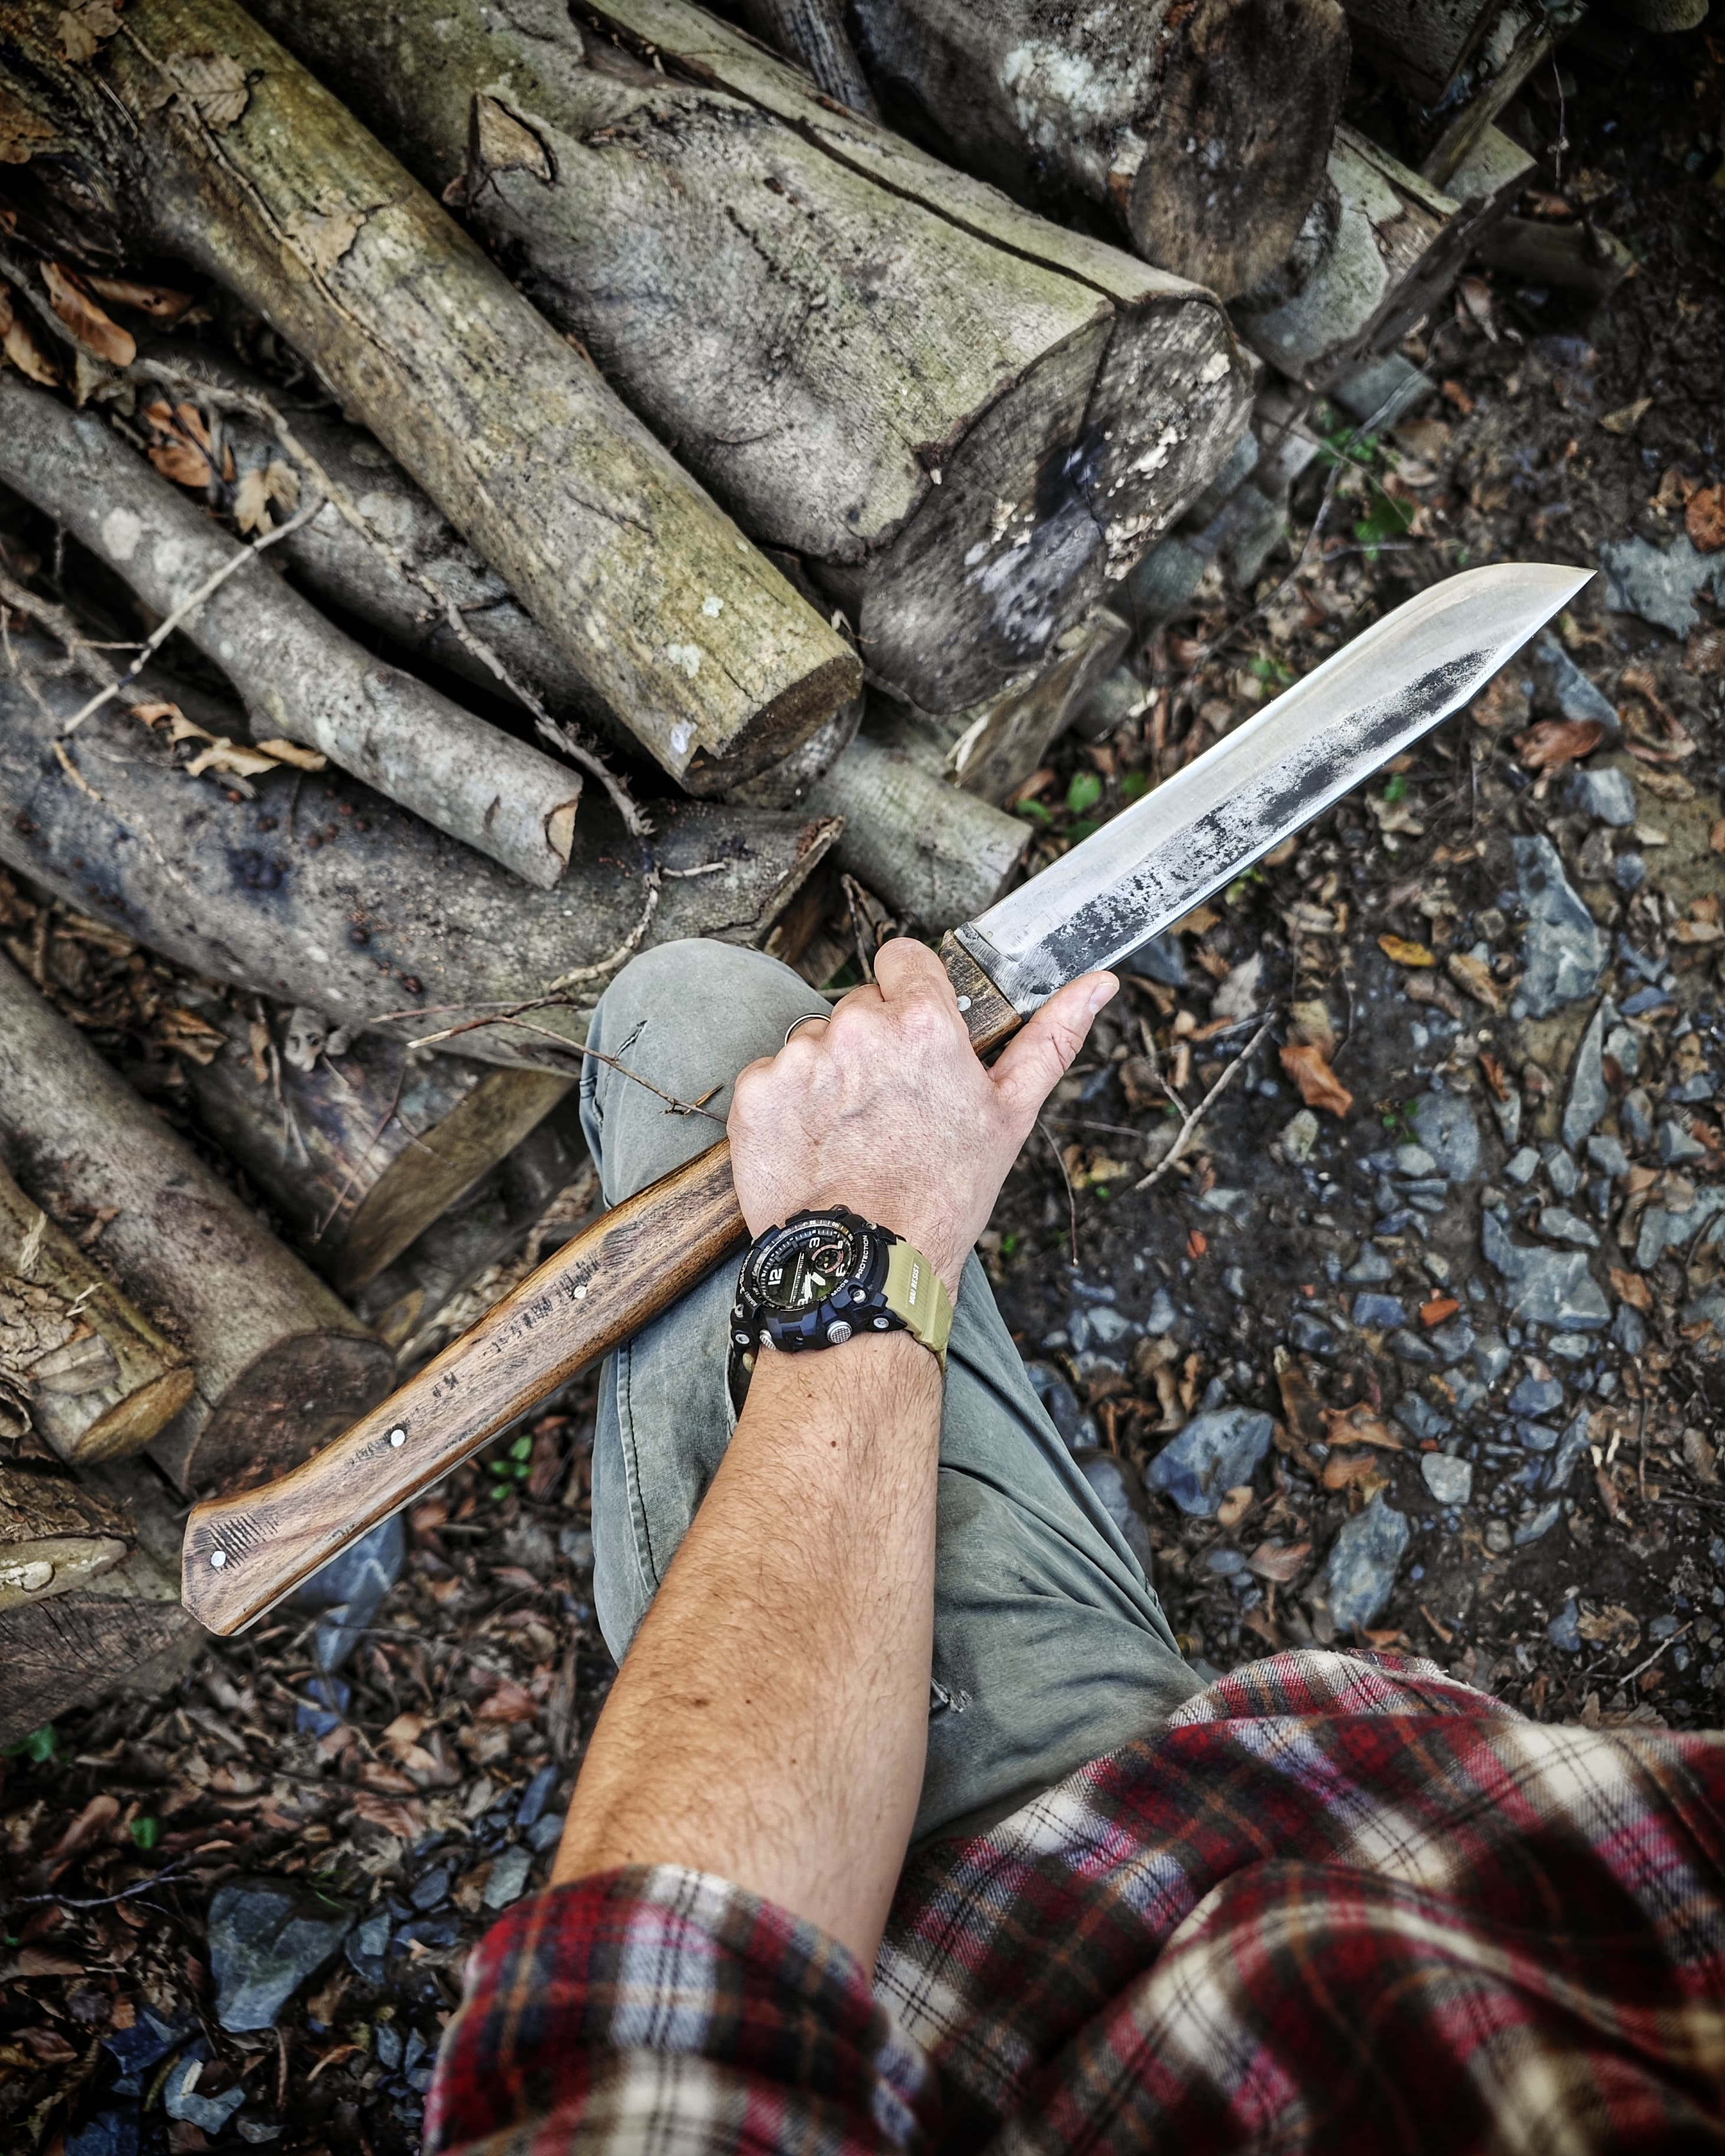  Fearless; Three-Function Hunter's Knife: Machete, Spear, and Defense Tool